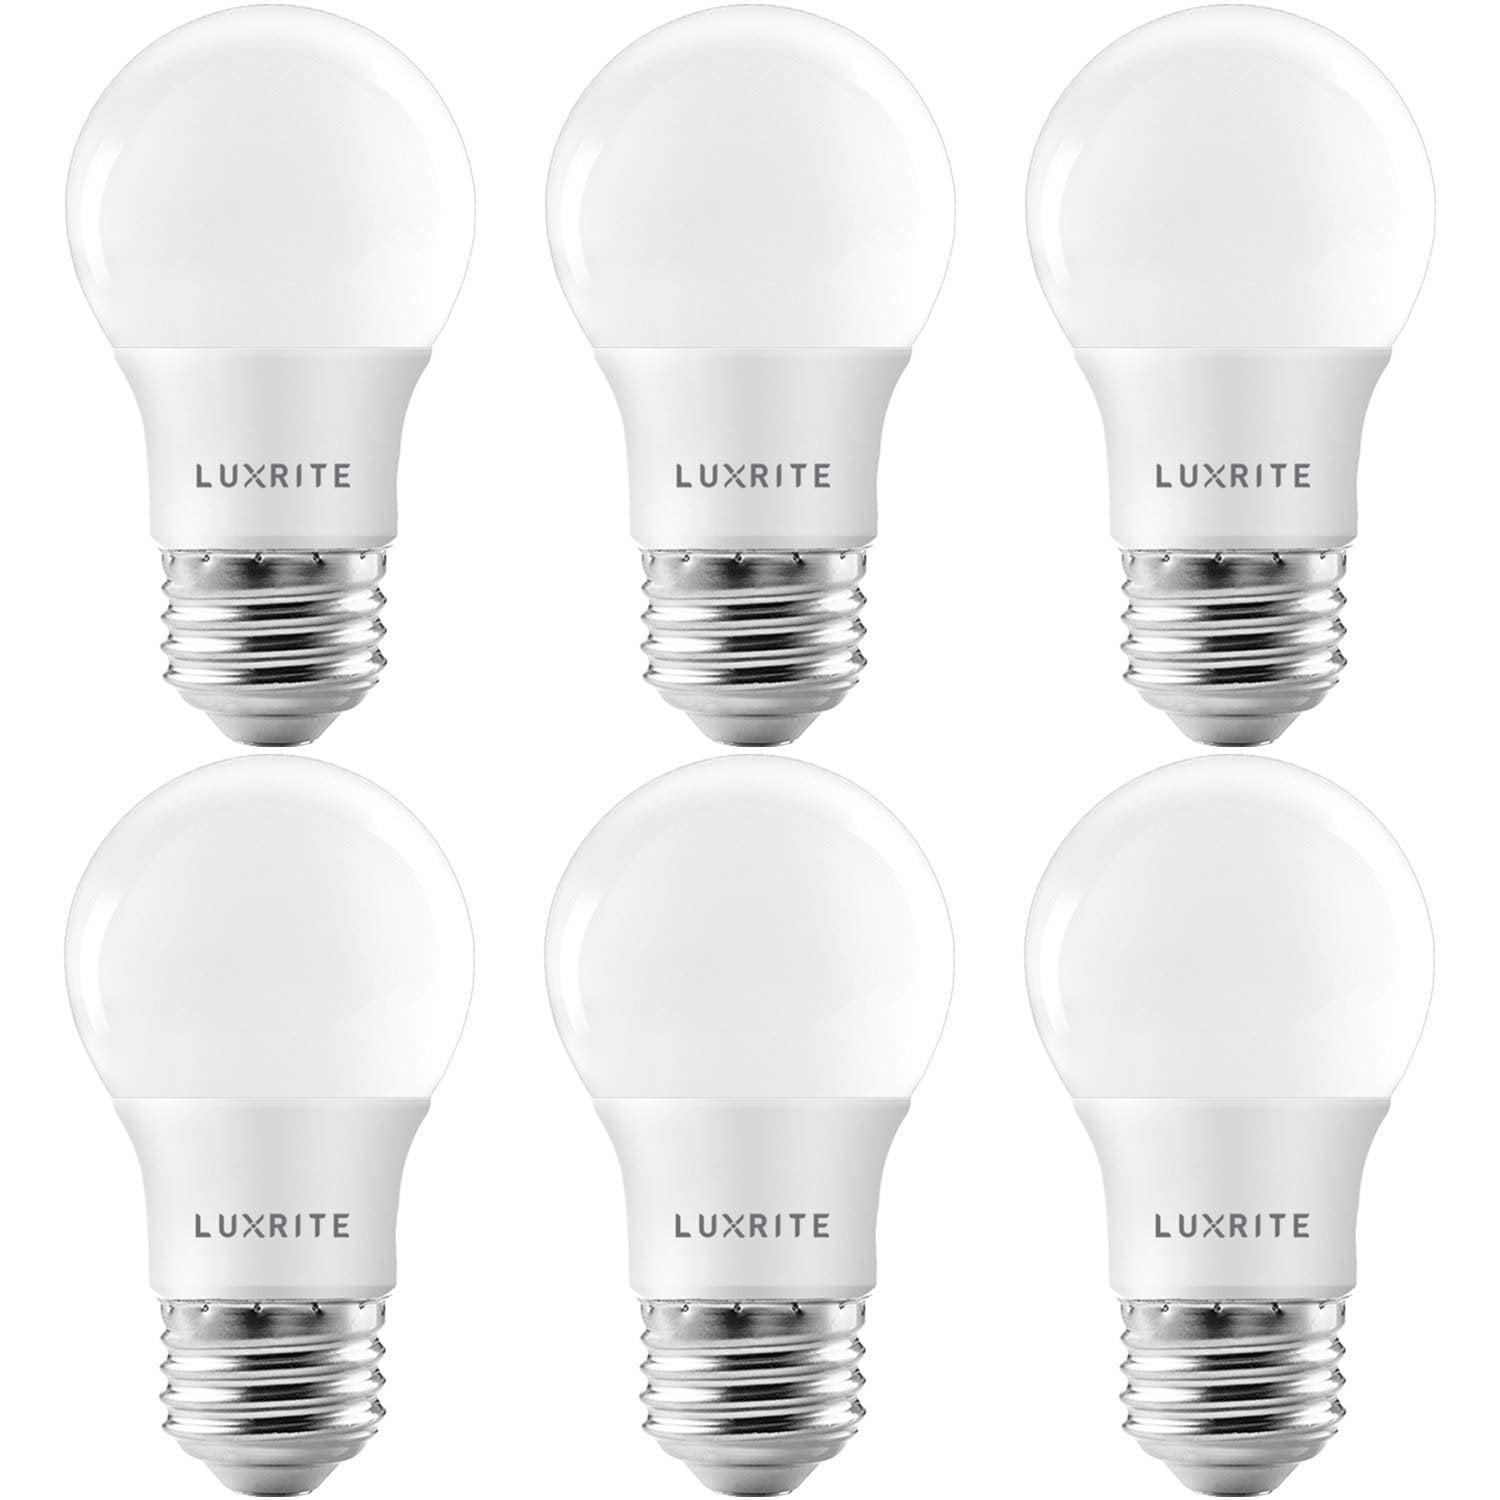 Dimmable E26 LED Bulb 800 Lumens Great for Any Indoor/Outdoor Use 7W Bulb to Replace 60W Incandesent Bulb UL Listed Damp Rated 6-Pack Luxrite LED Filament Bulb A19 Warm White 2700K 